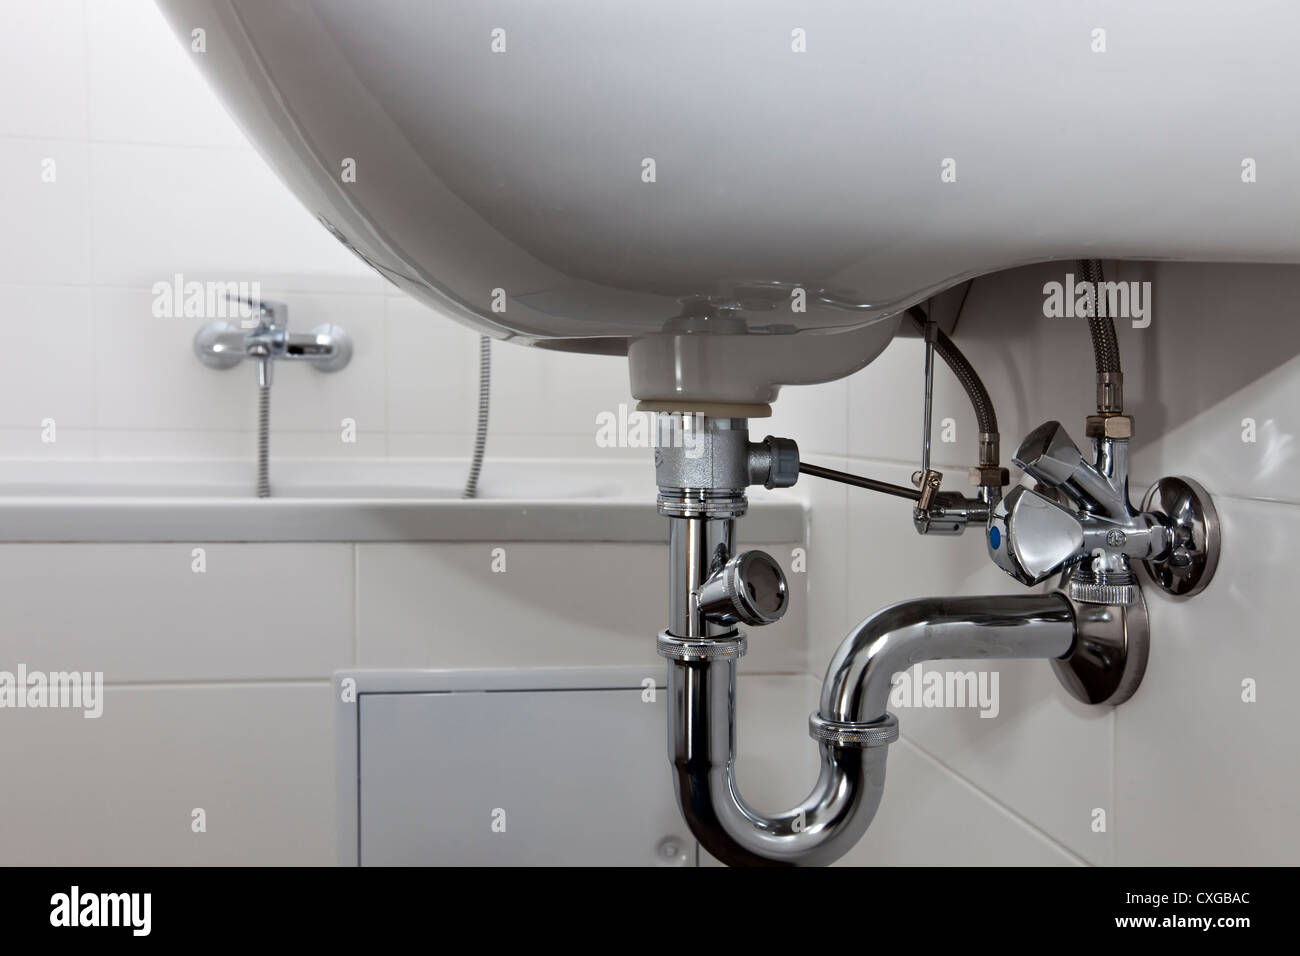 Sewage pipe of a Sink in a modern bath room Stock Photo